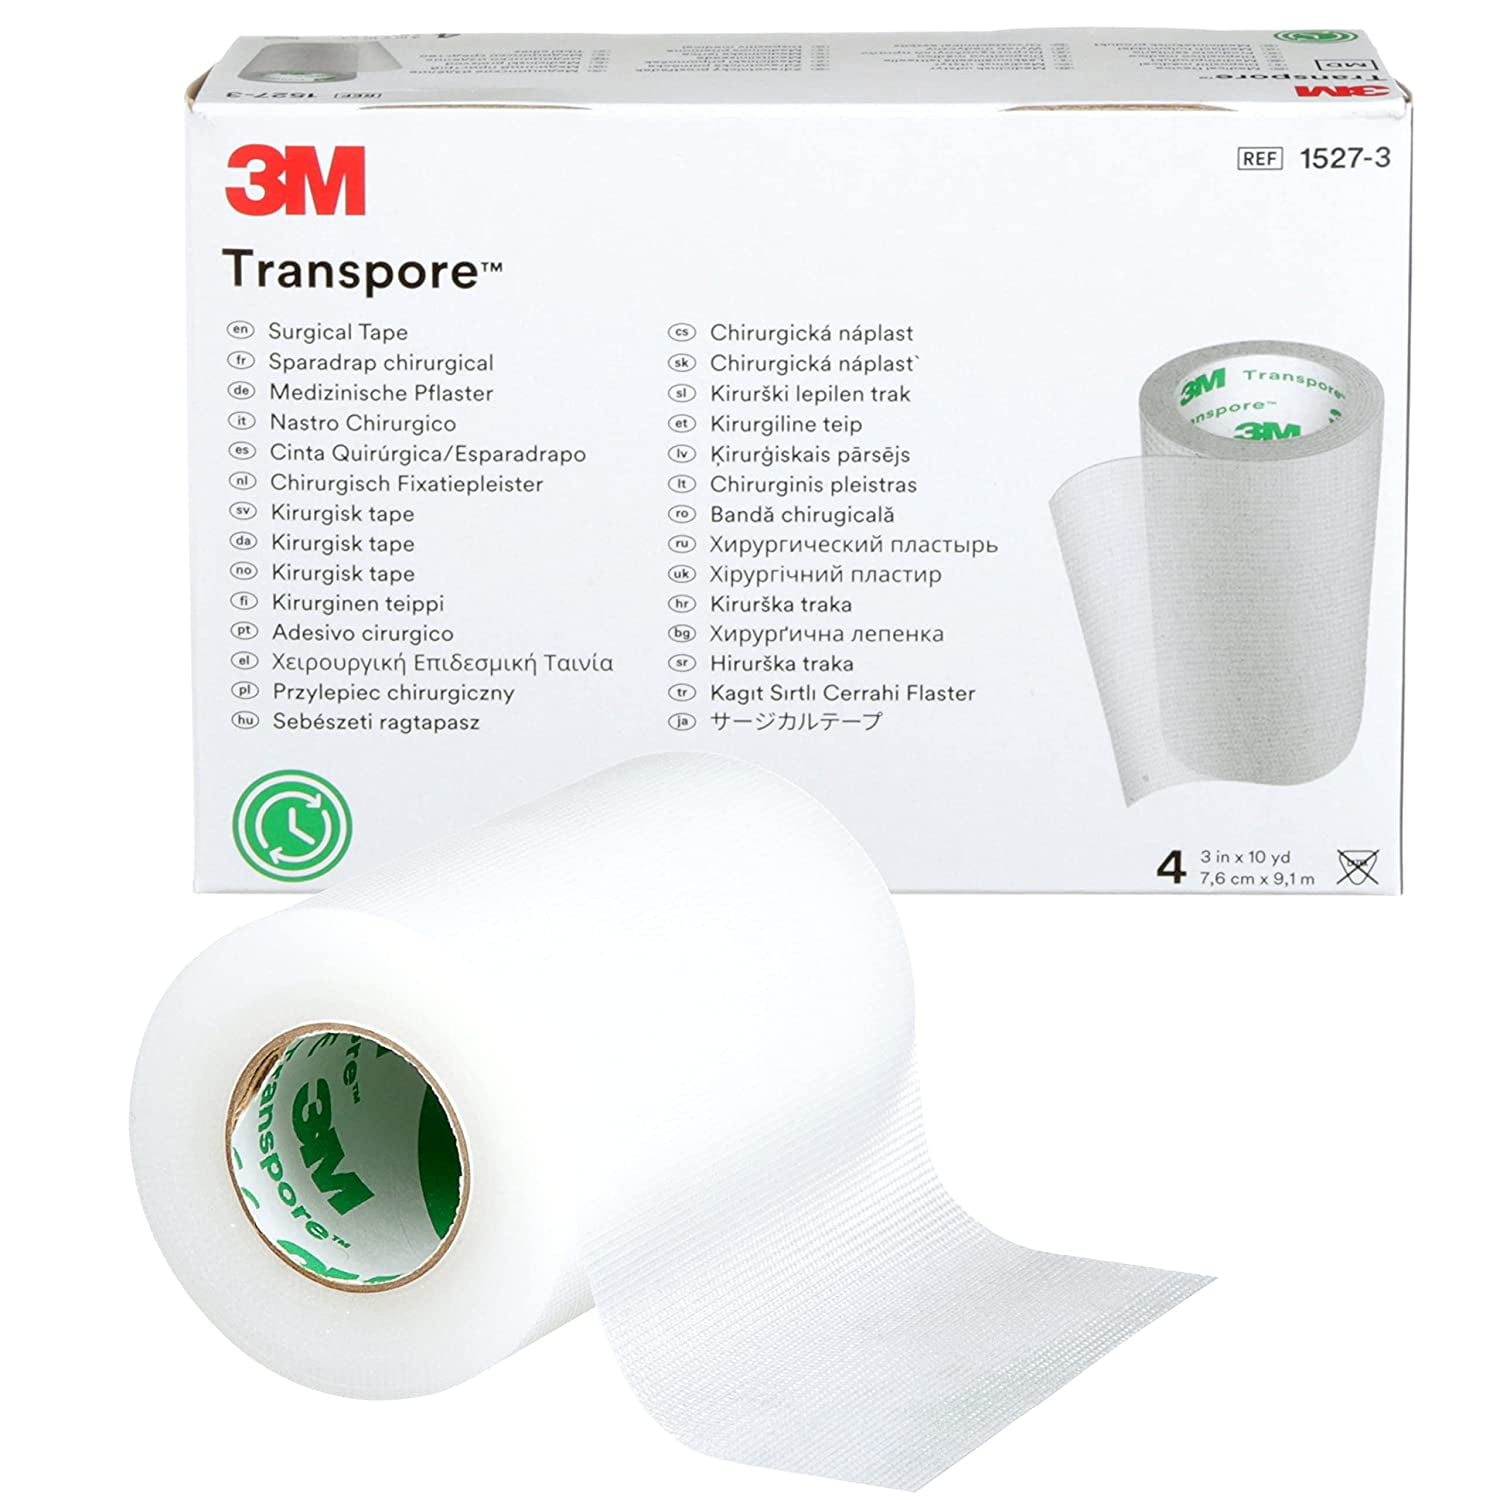 Micropore Surgical Tape White 3 Inches x 10 Yards - 4 Rolls